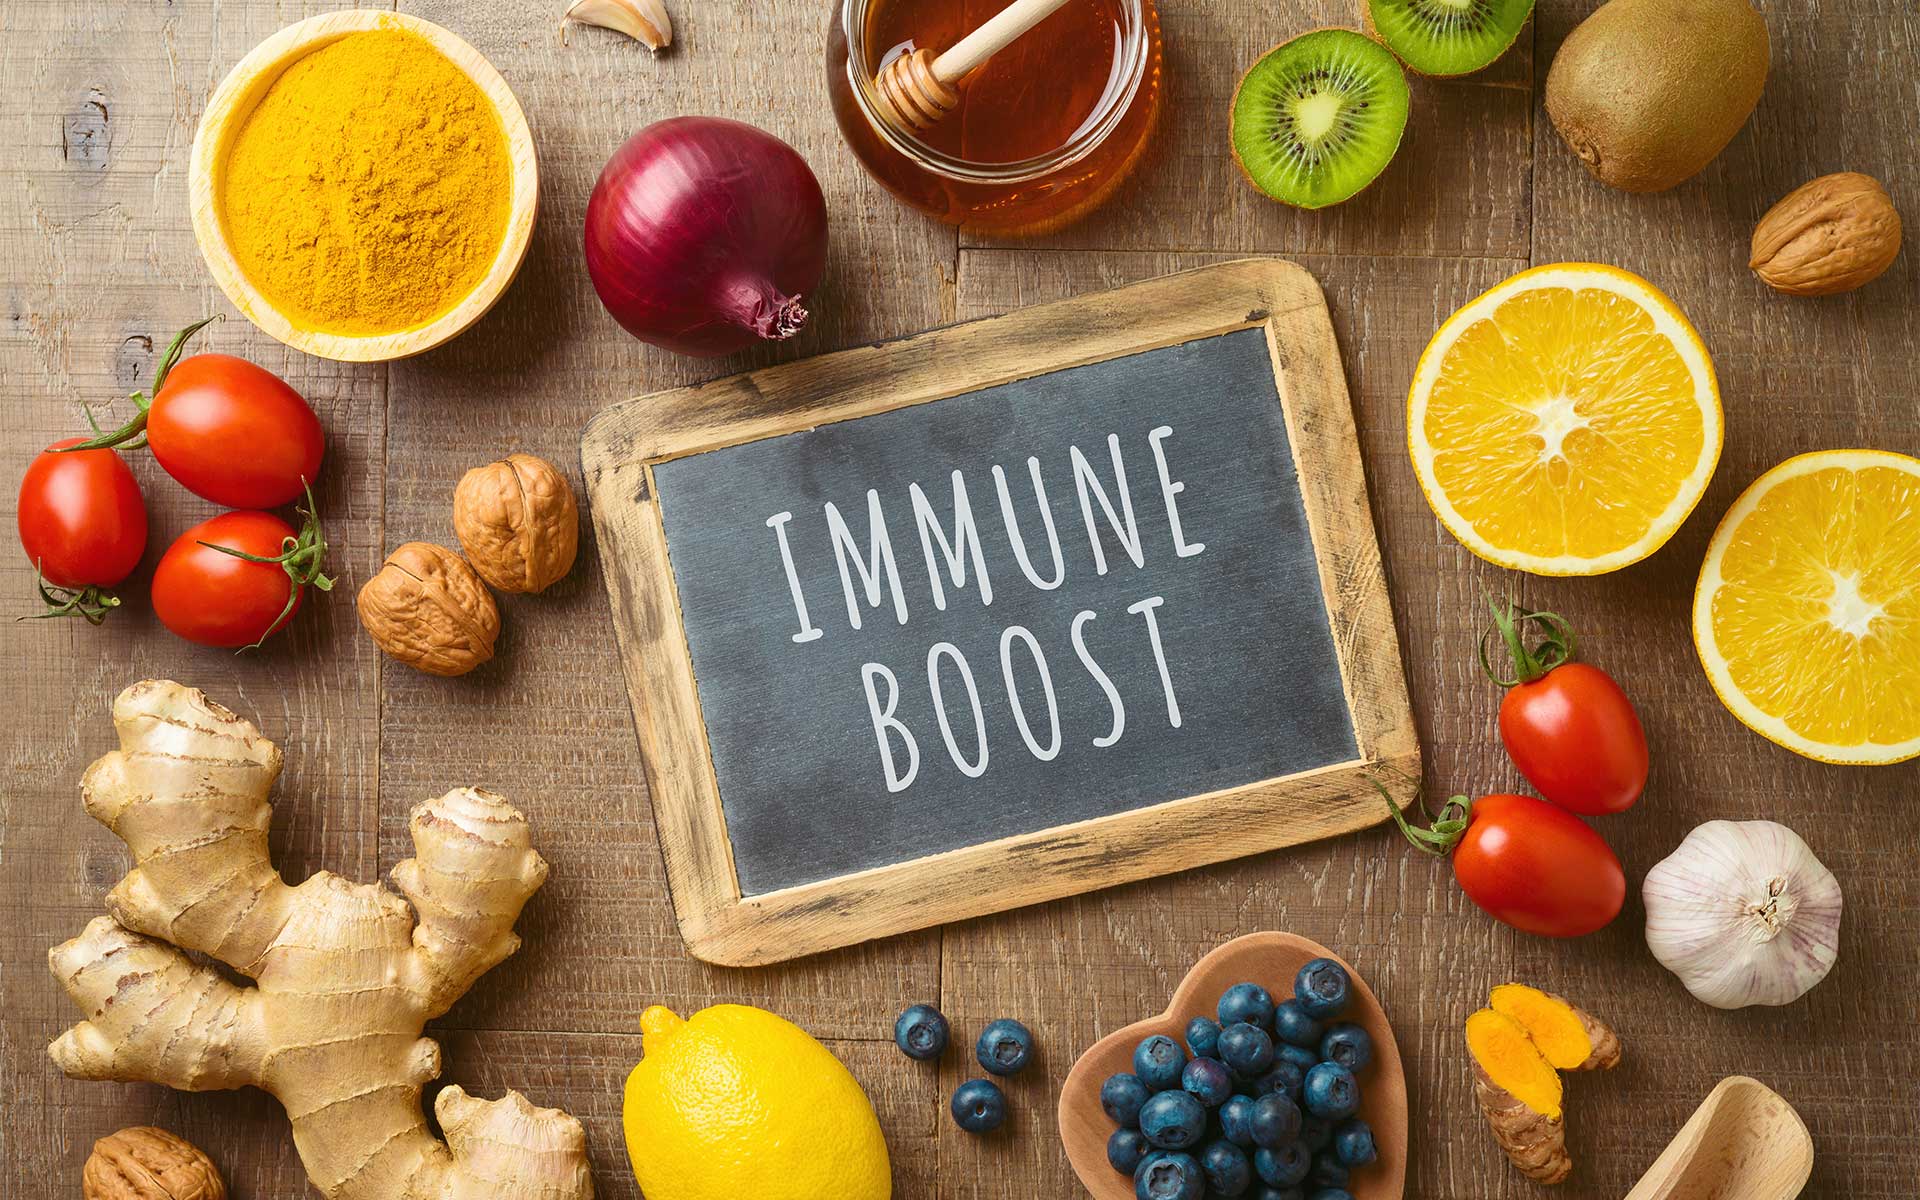 What You Should Eat For Stronger Immune System